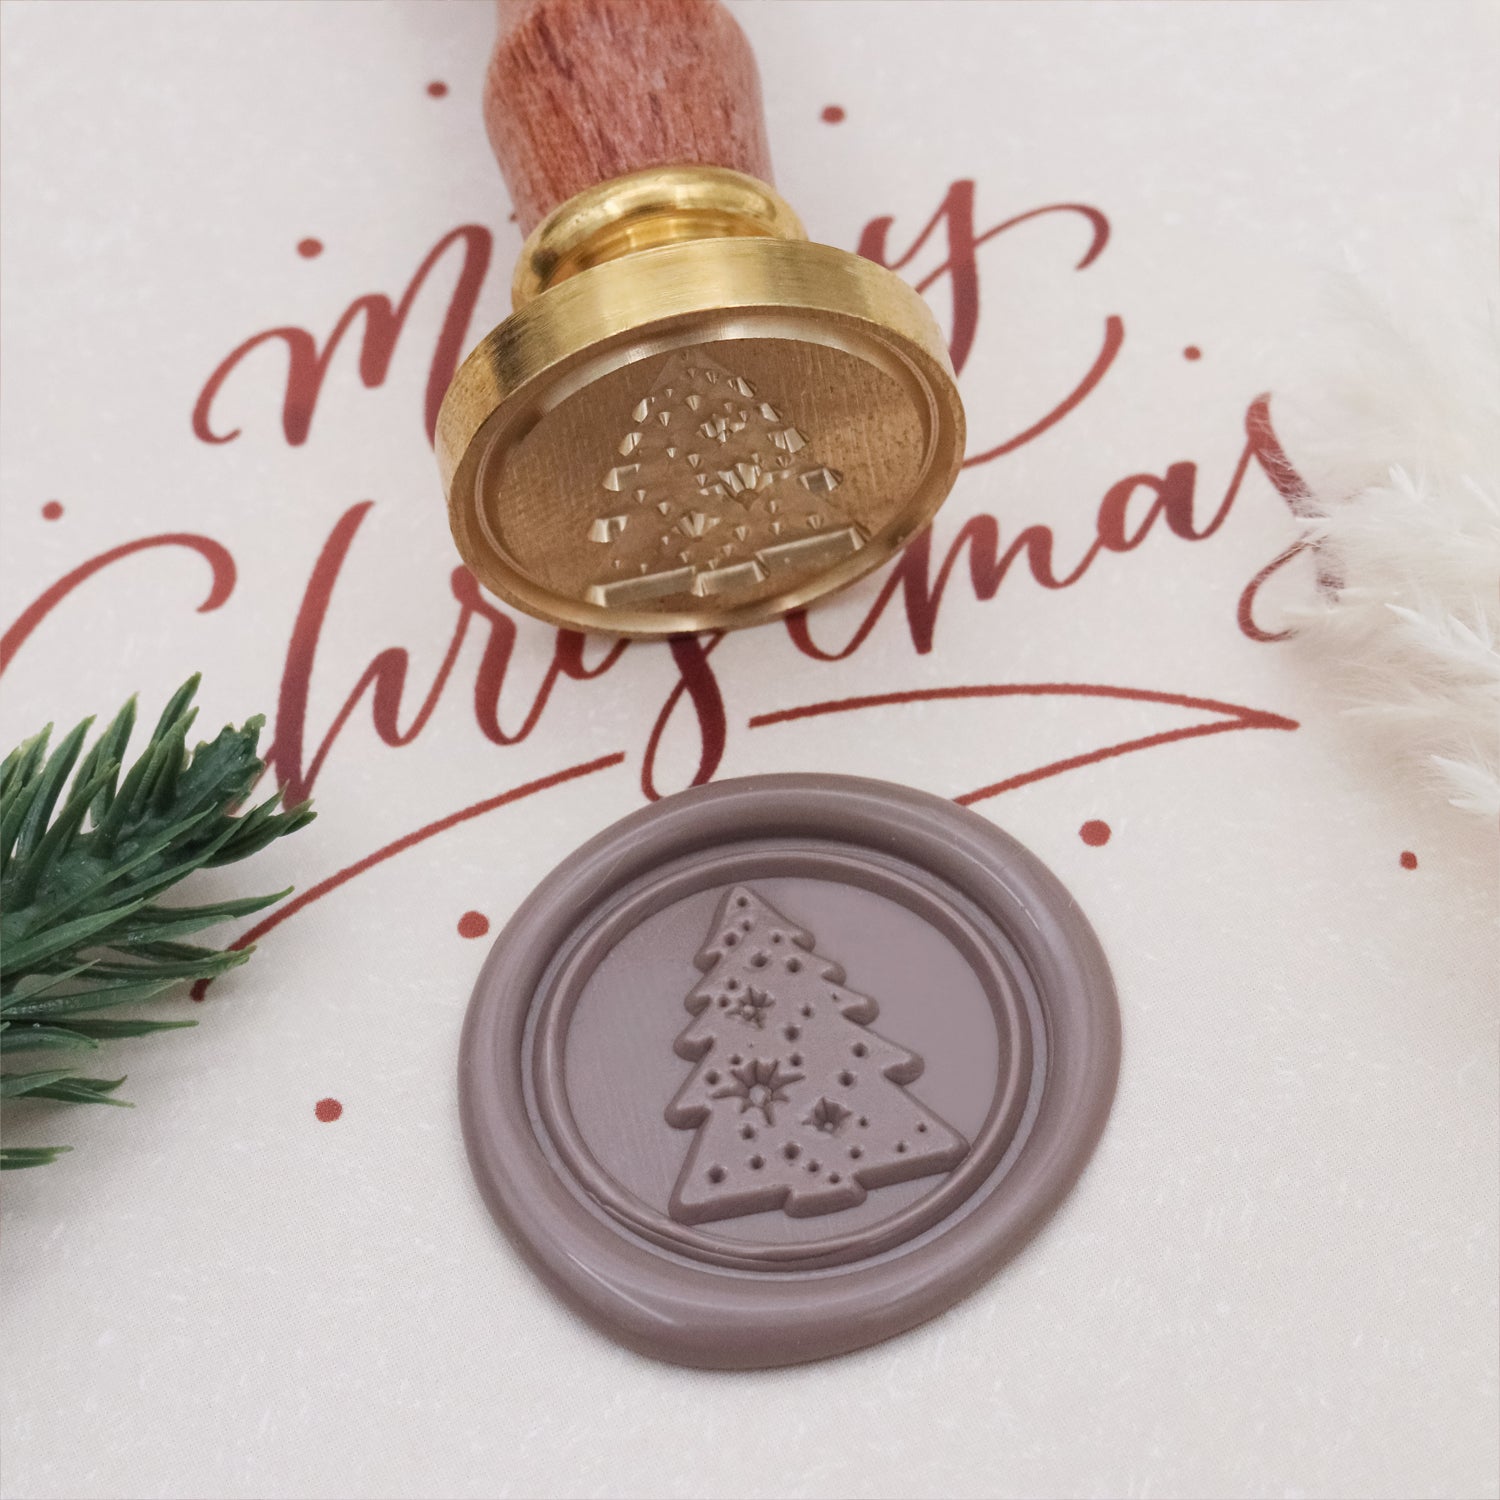 MNYR Vintage Fancy Sealing Wax Seal Stamp Kit Melting Spoon Wax Stick  Candle Wooden Book Gift Box Set Wedding Invitation Embellishment Holiday  Card